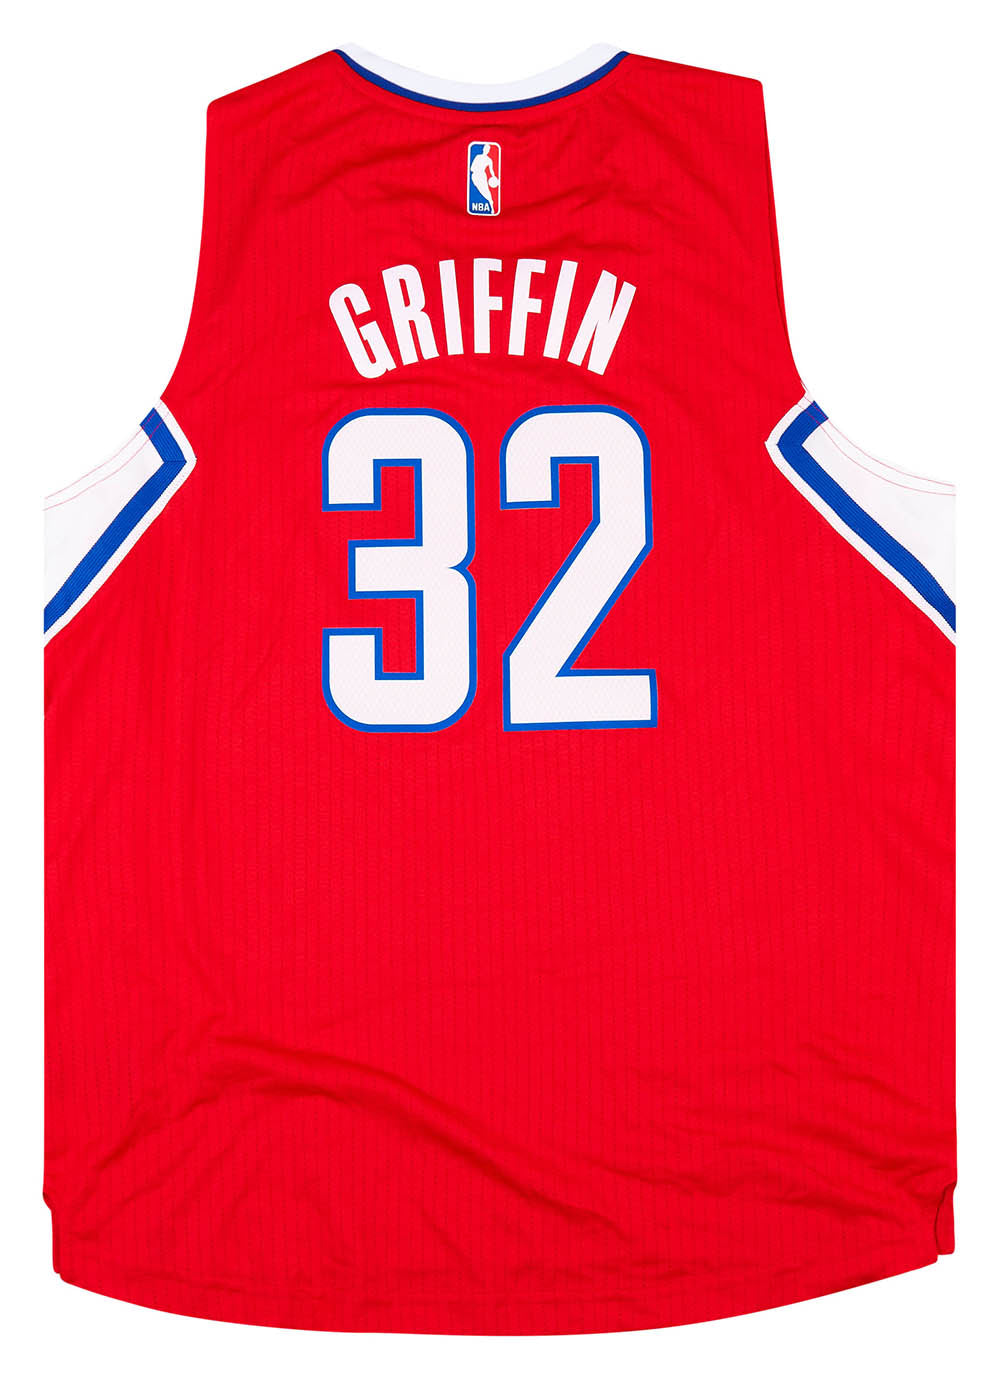 Adidas BLAKE GRIFFIN #32 Los Angeles LA Clippers Jersey Size Small Medium